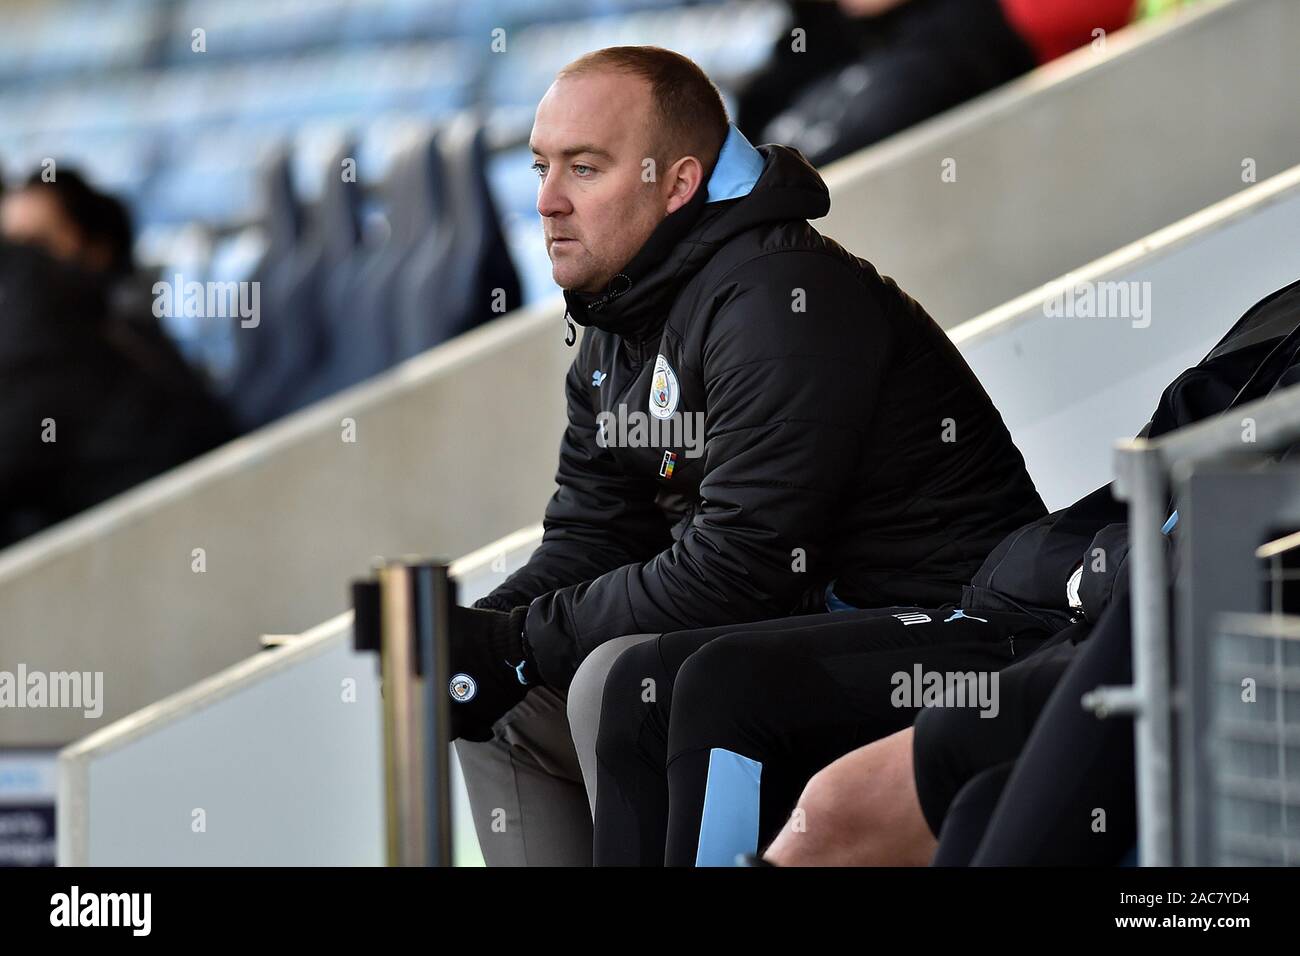 Manchester, UK. 01st Dec, 2019. MANCHESTER, ENGLAND - DECEMBER 1ST Nick Cushing, manager of Manchester City in action during the Barclays FA Women's Super League match between Manchester City and Liverpool at the Manchester City Academy Stadium, Manchester on Sunday 1st December 2019. (Credit: Eddie Garvey | MI News) Photograph may only be used for newspaper and/or magazine editorial purposes, license required for commercial use Credit: MI News & Sport /Alamy Live News Stock Photo